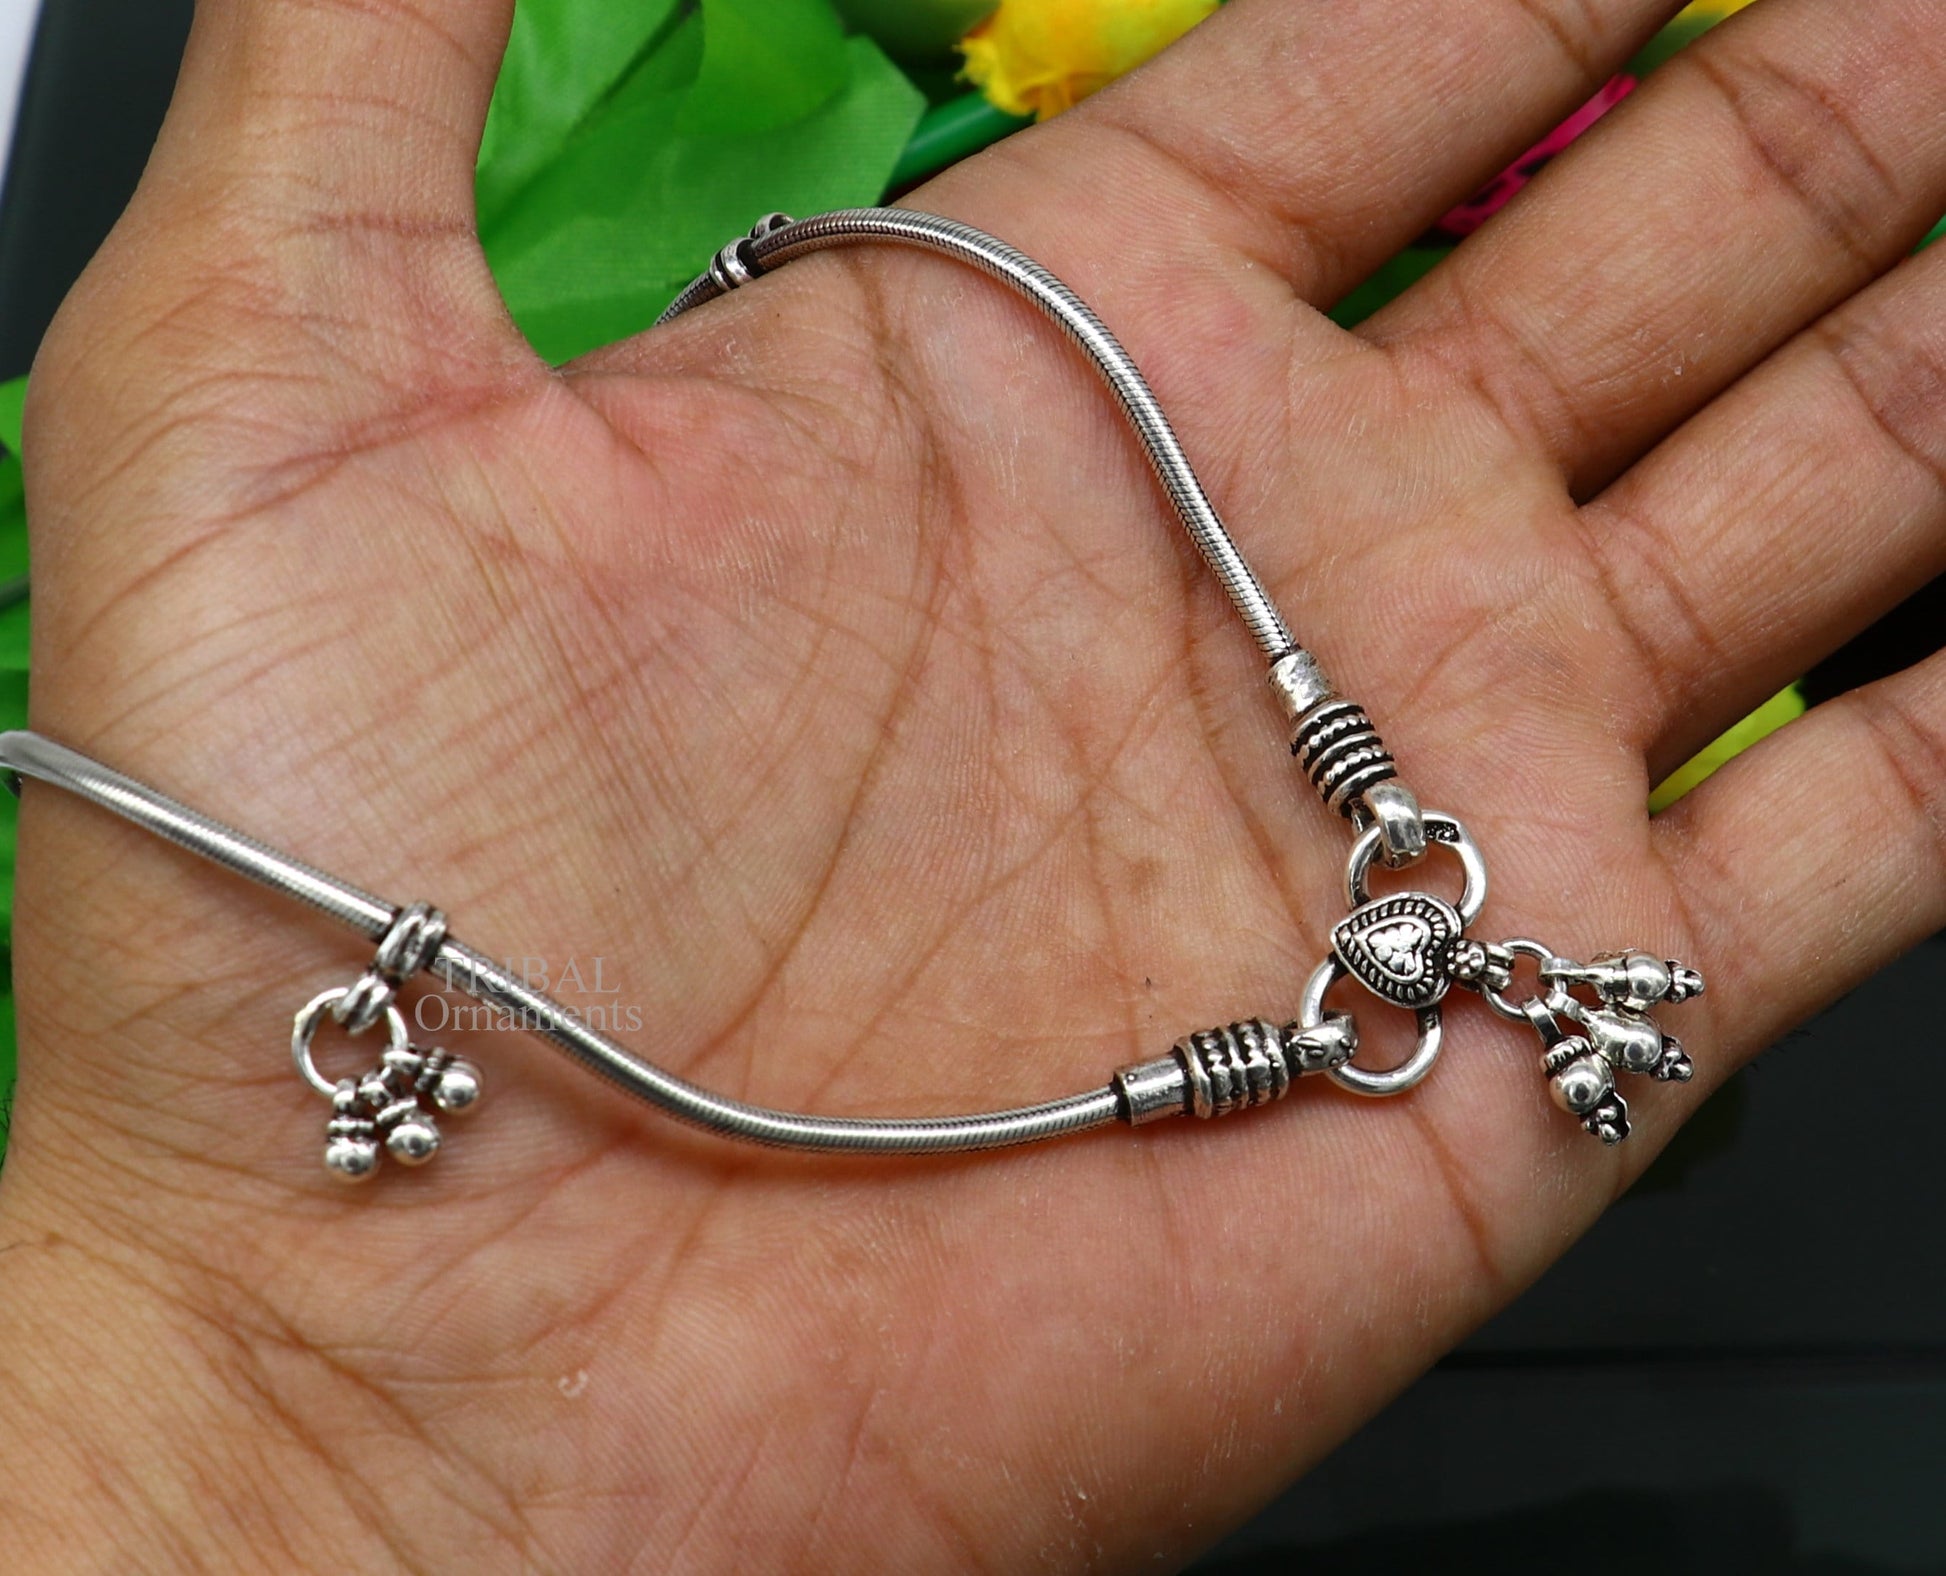 11" long Solid silver customized snake chain design anklets gorgeous ankle bracelet, tribal belly dance jewelry, daily use jewelry nank443 - TRIBAL ORNAMENTS